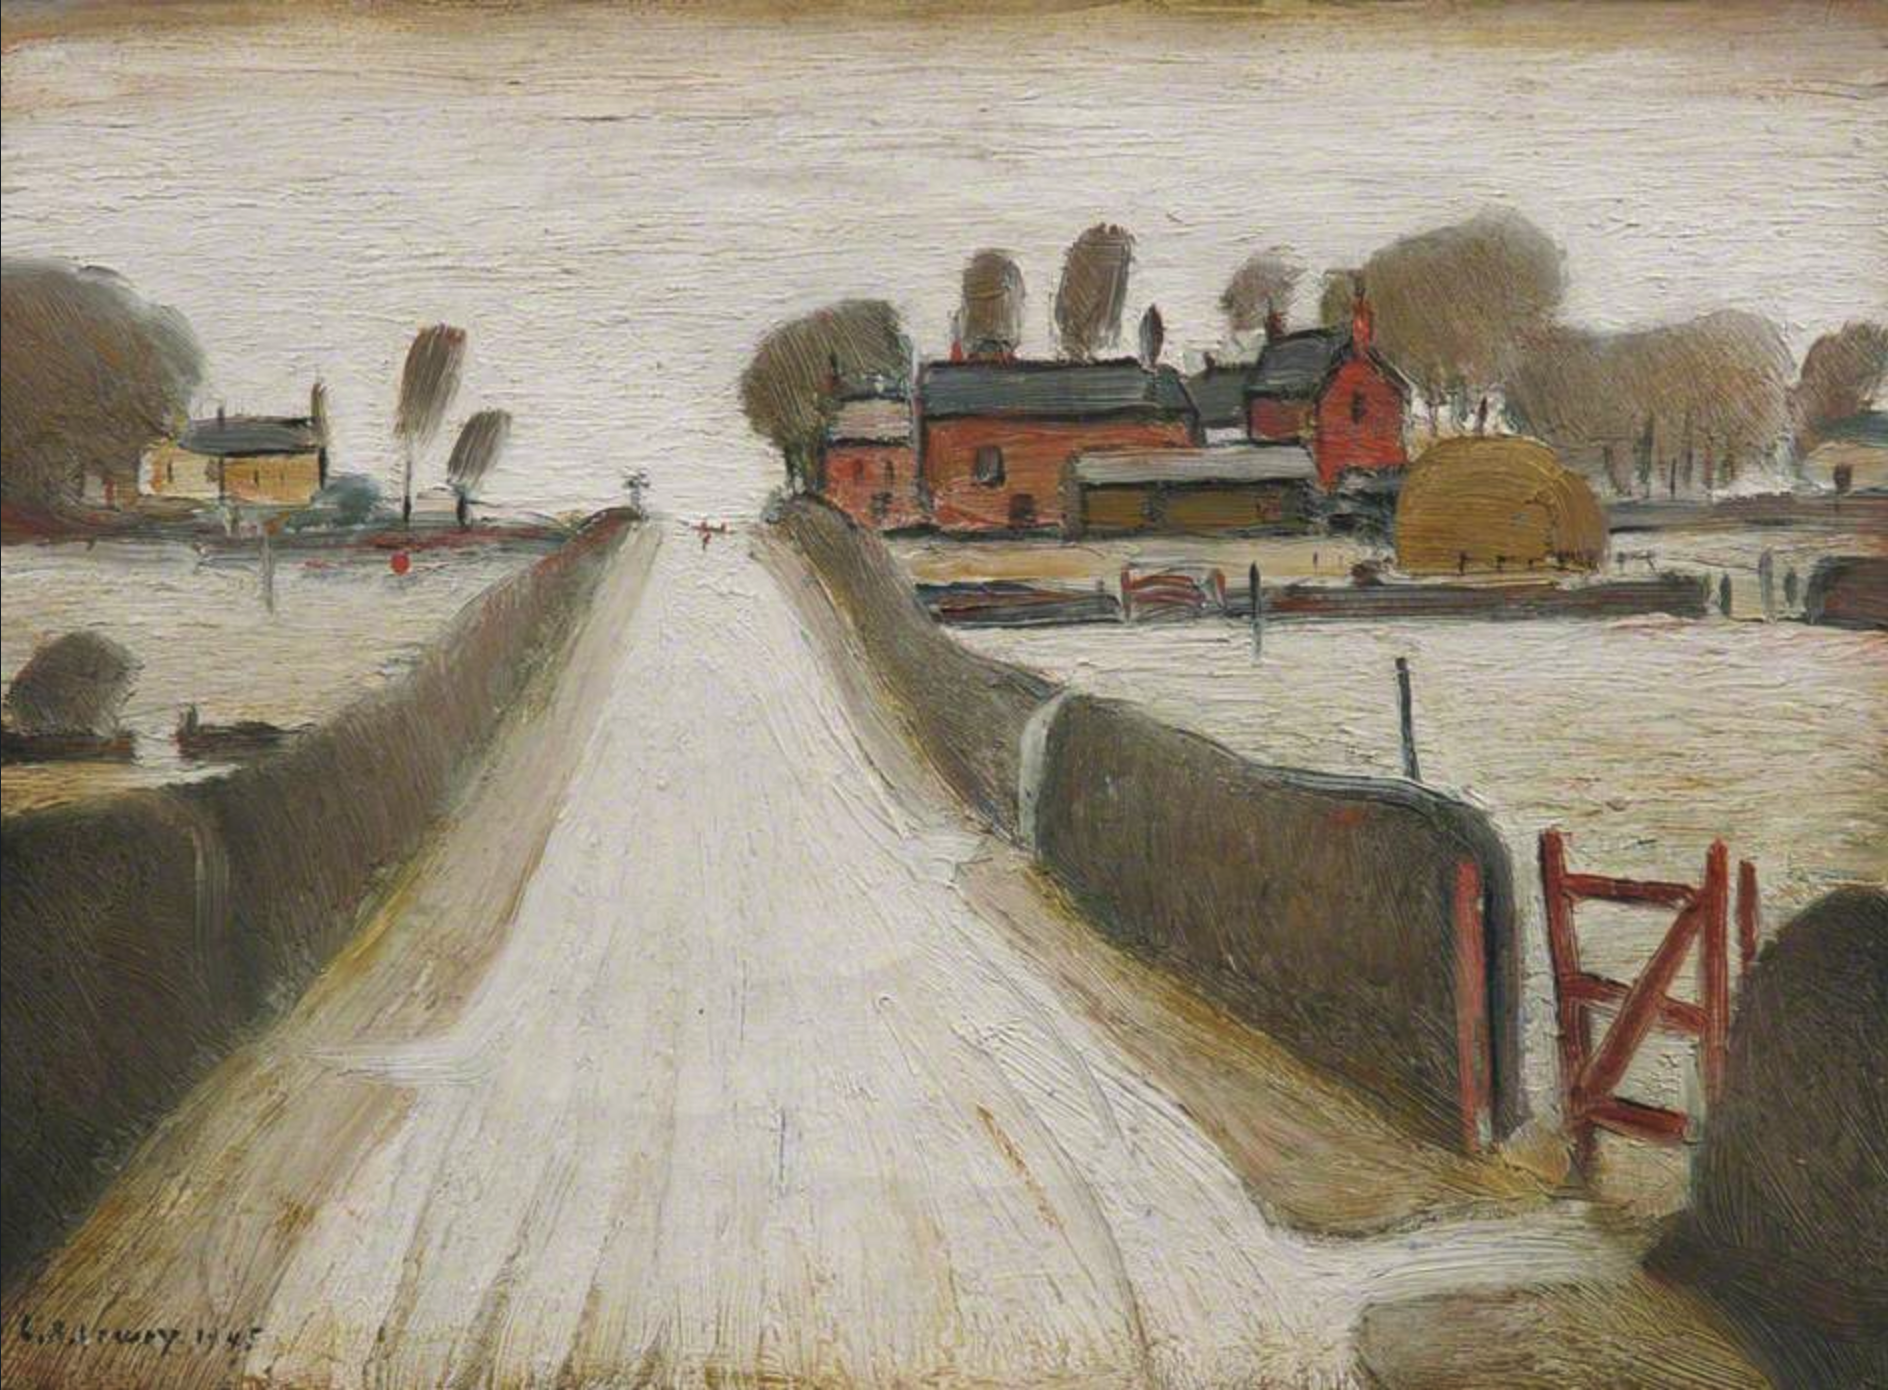 Flyde Farm (1945) by Laurence Stephen Lowry (1887 - 1976), English artist.